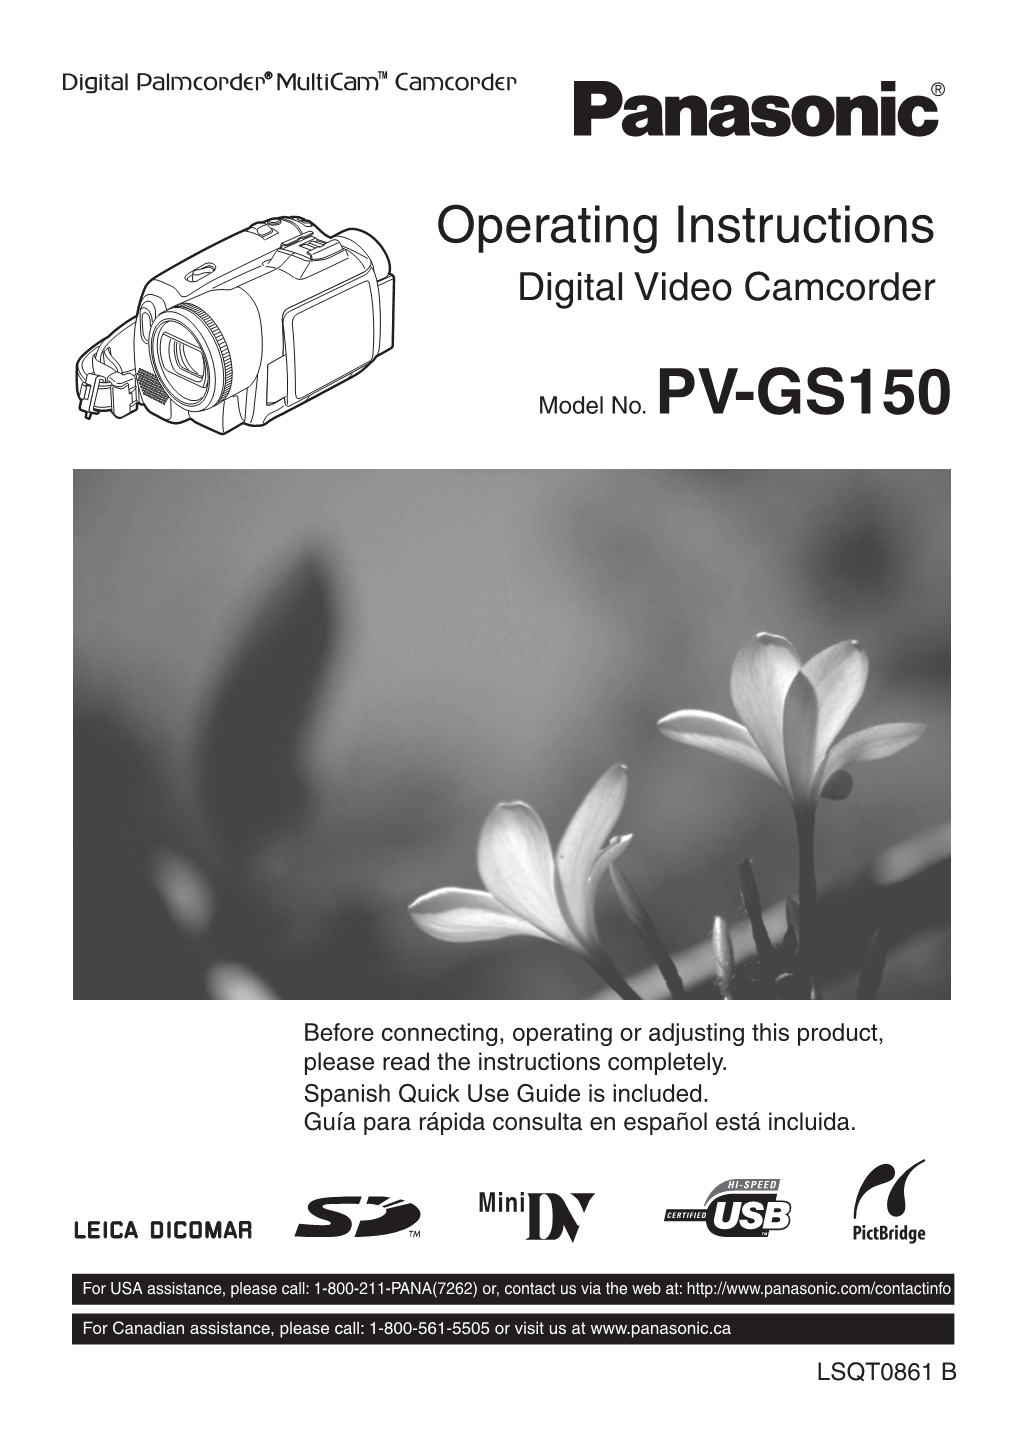 Operating Instructions Digital Video Camcorder